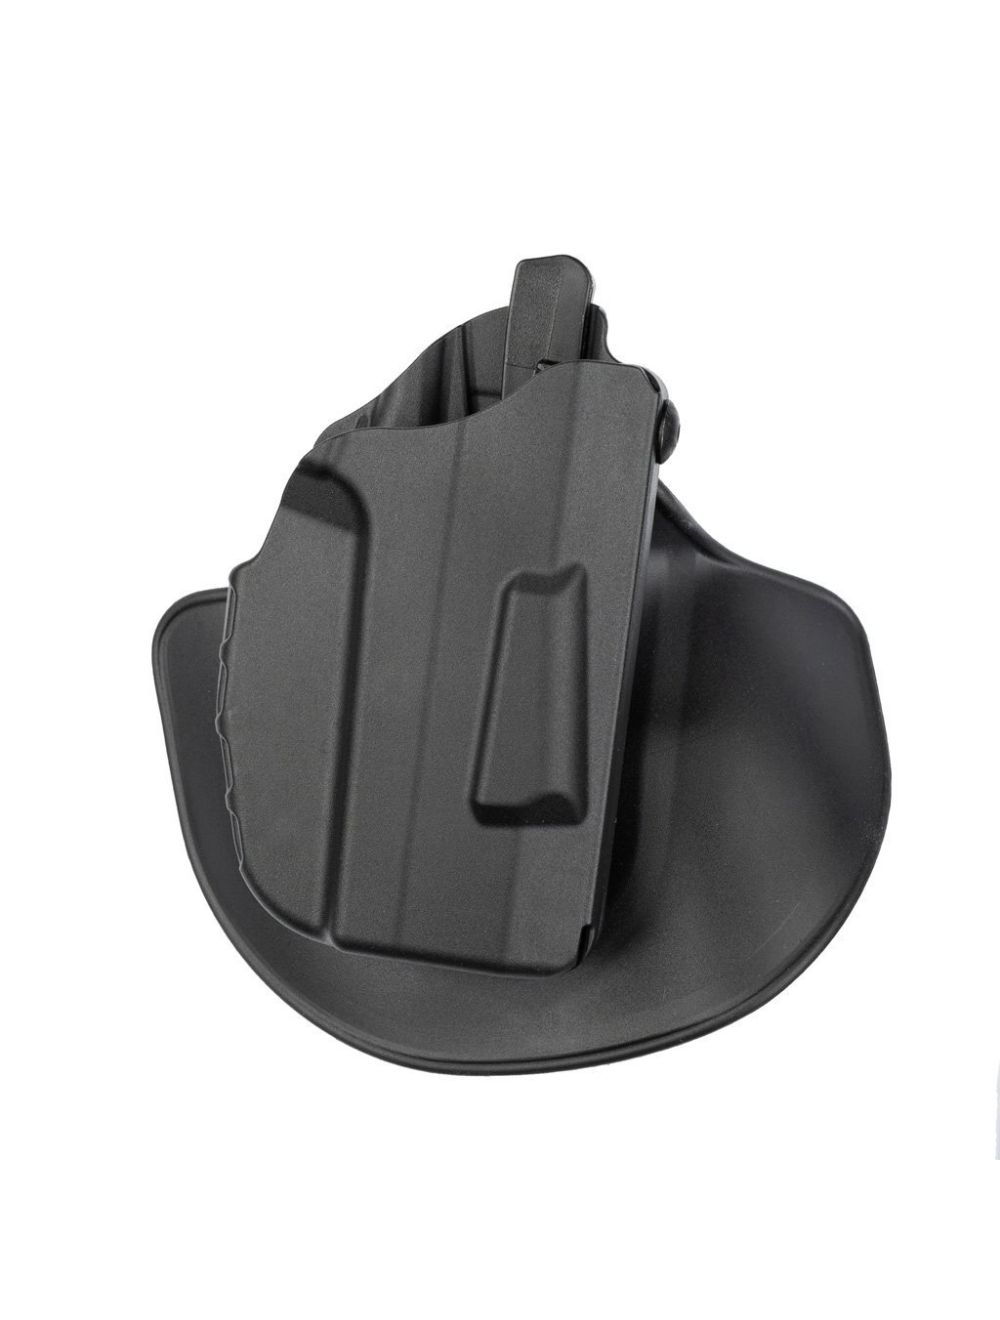 Model 7378 7TS ALS Concealment Paddle and Belt Loop Combo Holster for Sig Sauer P365XL